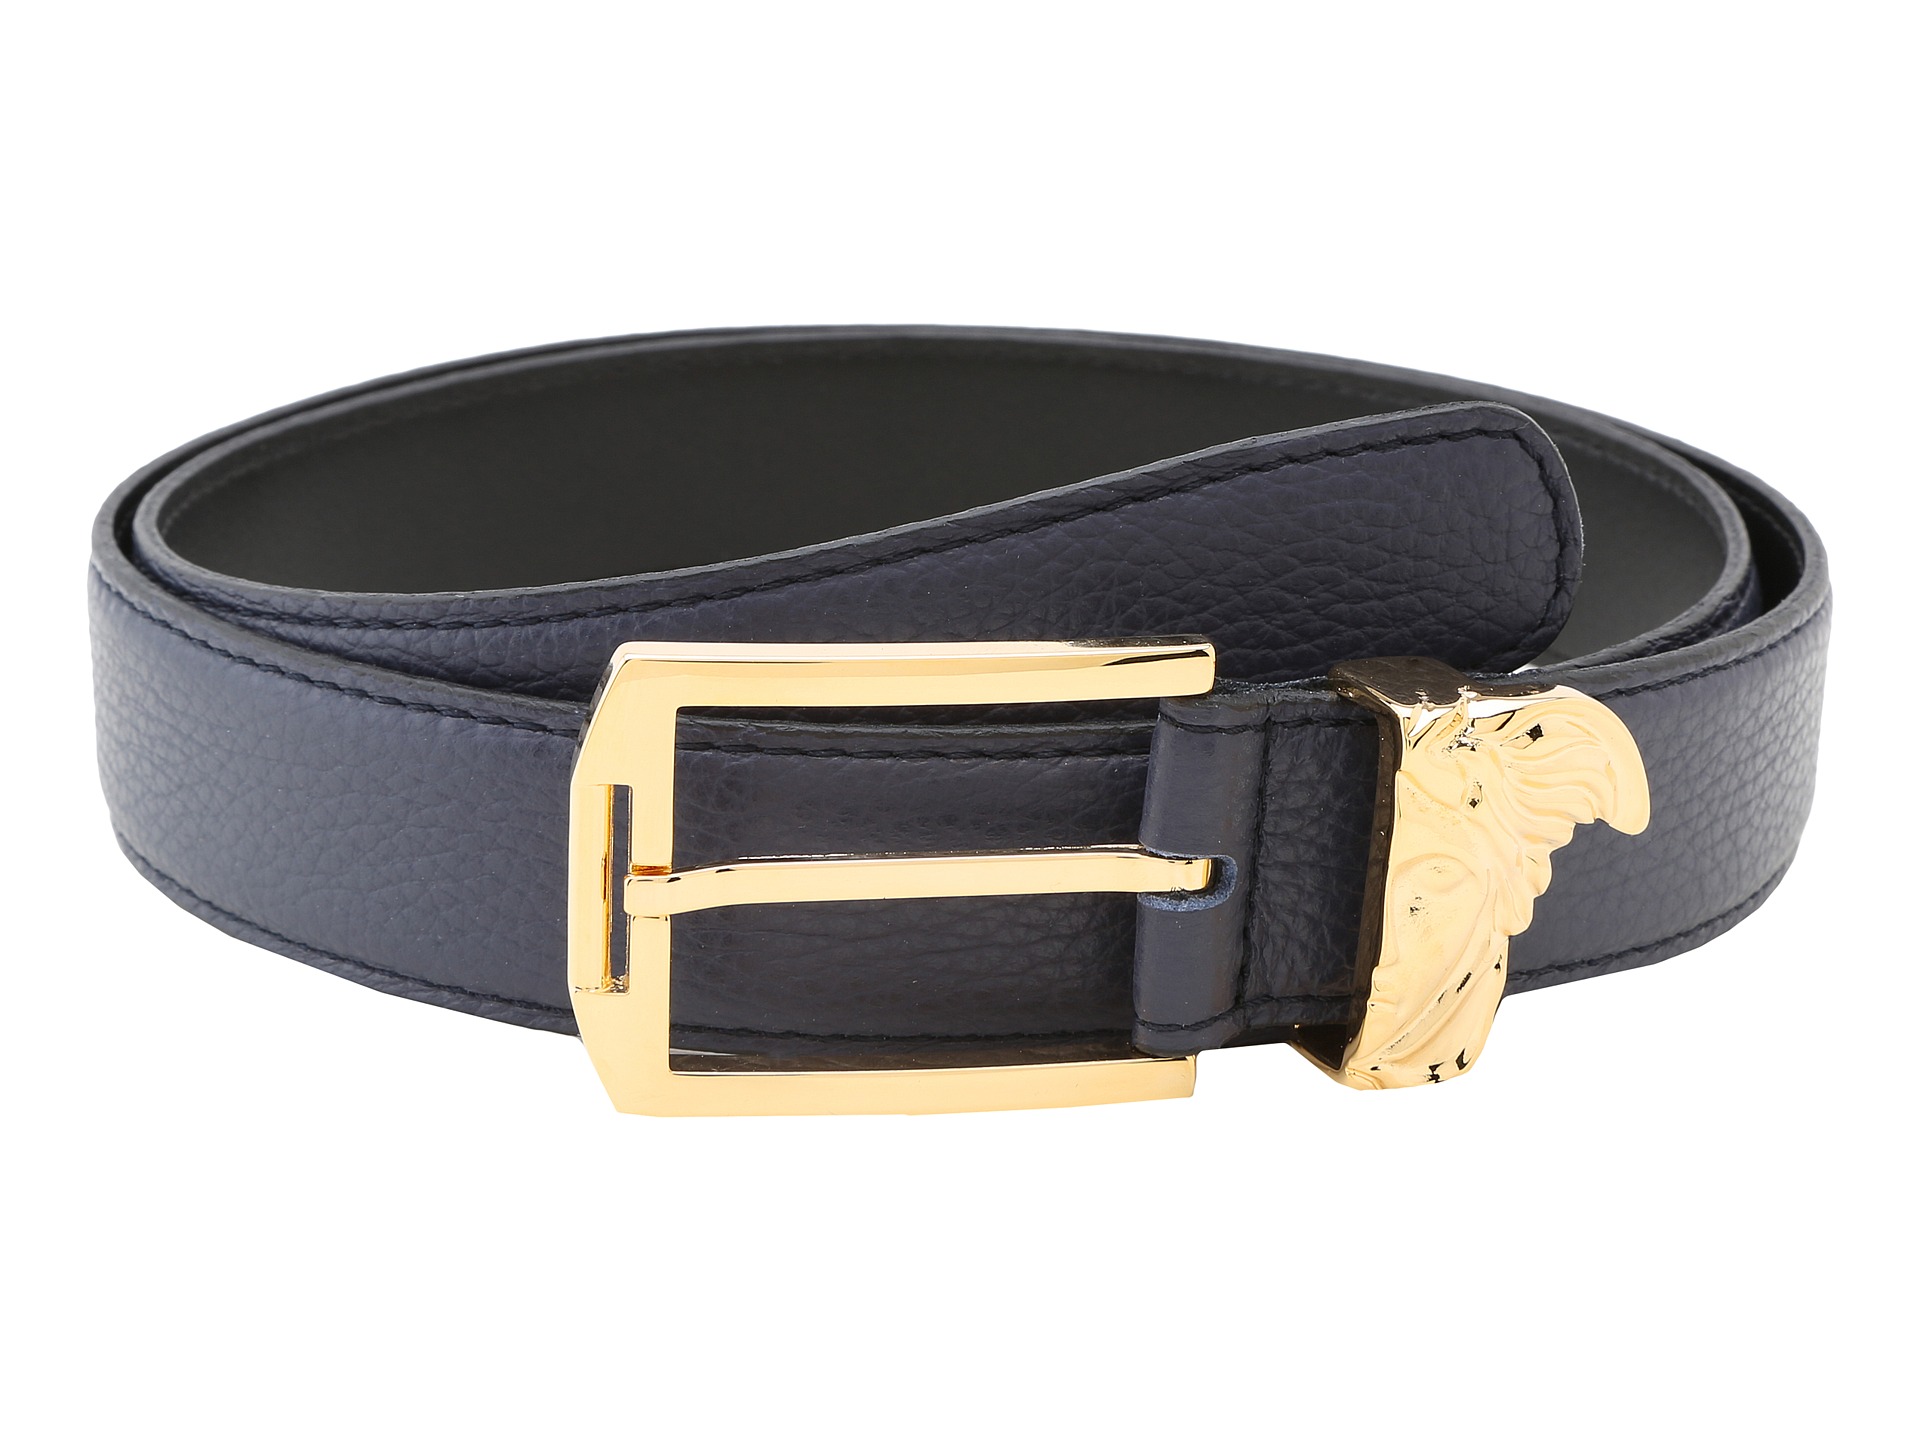 Versace Collection Printed Elk Gold Medusa Buckle Belt | Shipped Free at Zappos